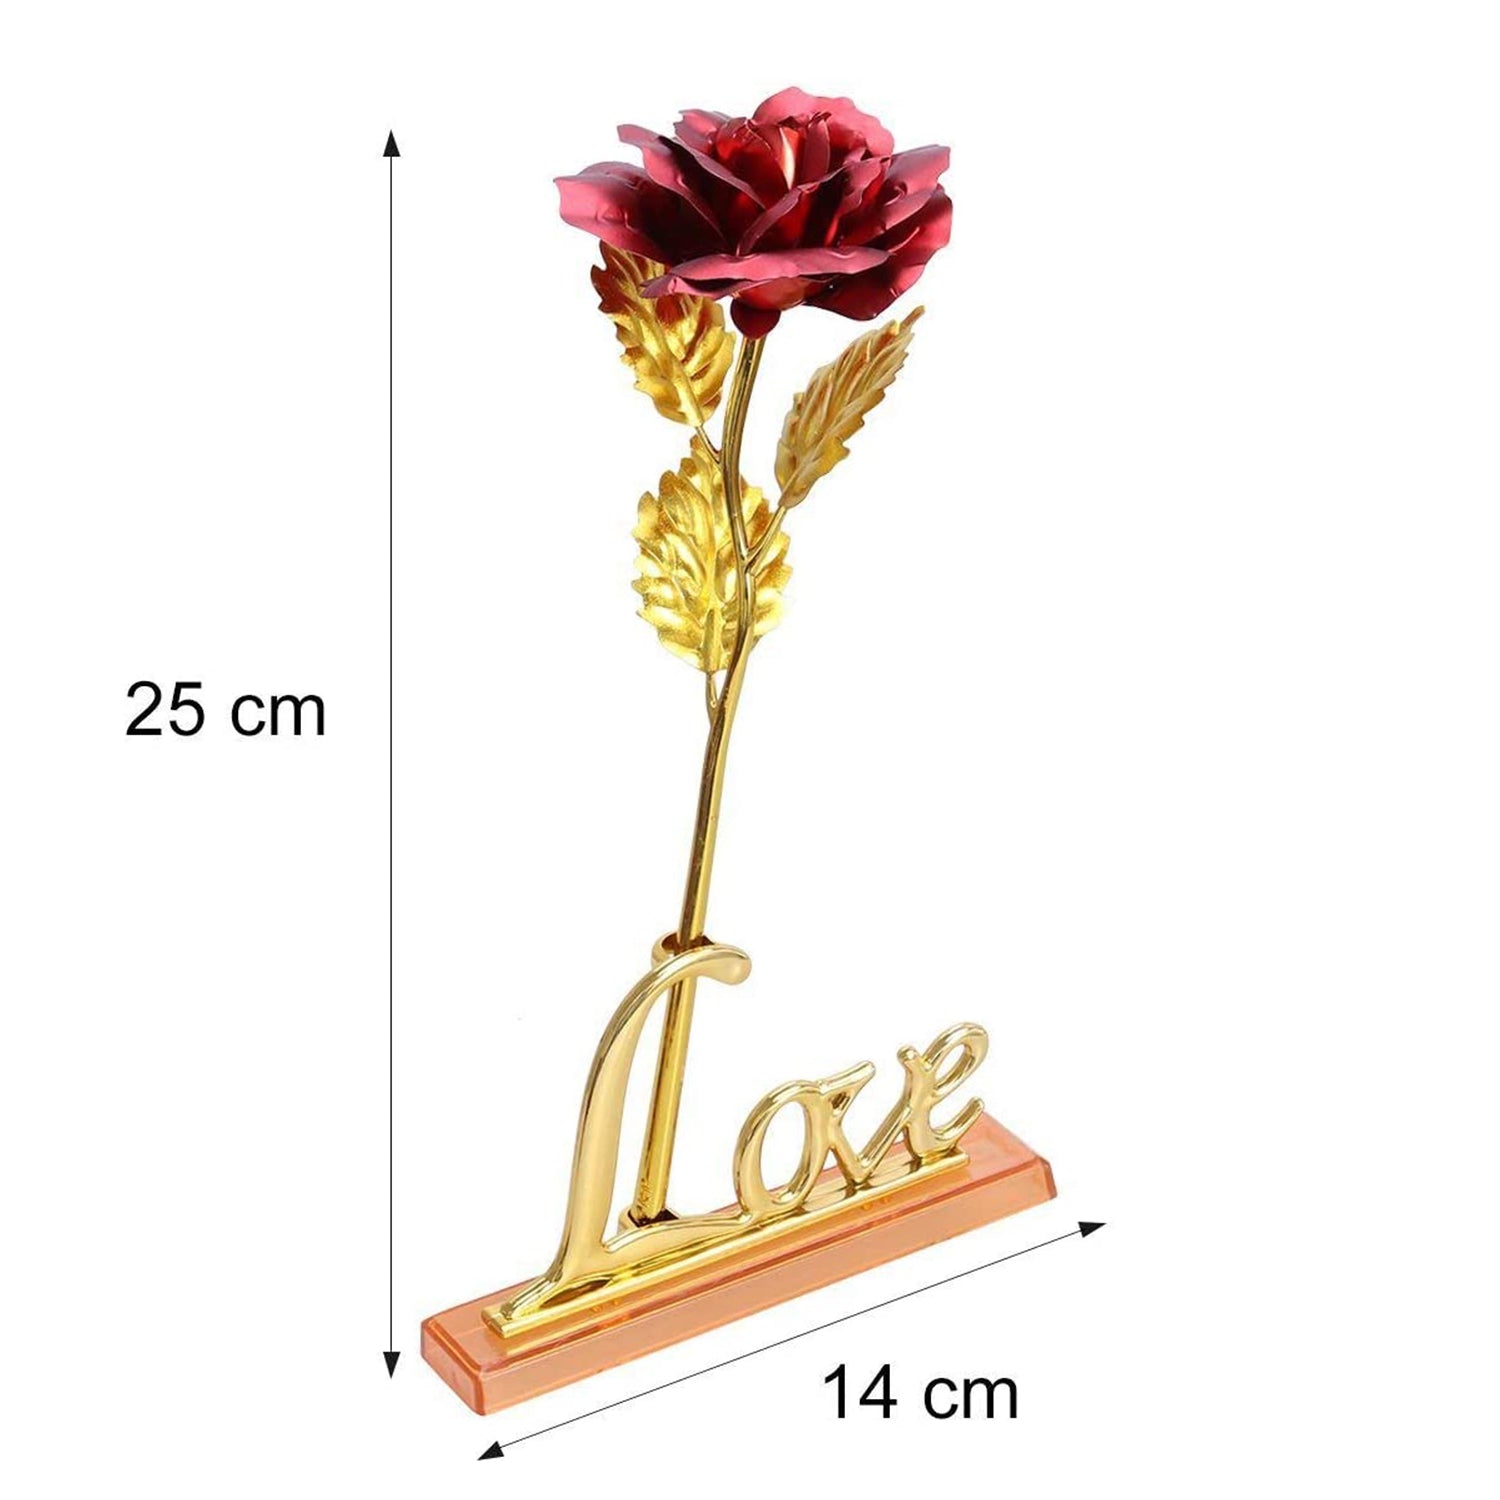 4809 24k Gold Rose,hicoosee Gold Foil Plated Rose with LOVE Stand and Gift Box for Anniversary,Birthday,Wedding,Christmas,Thanks giving 